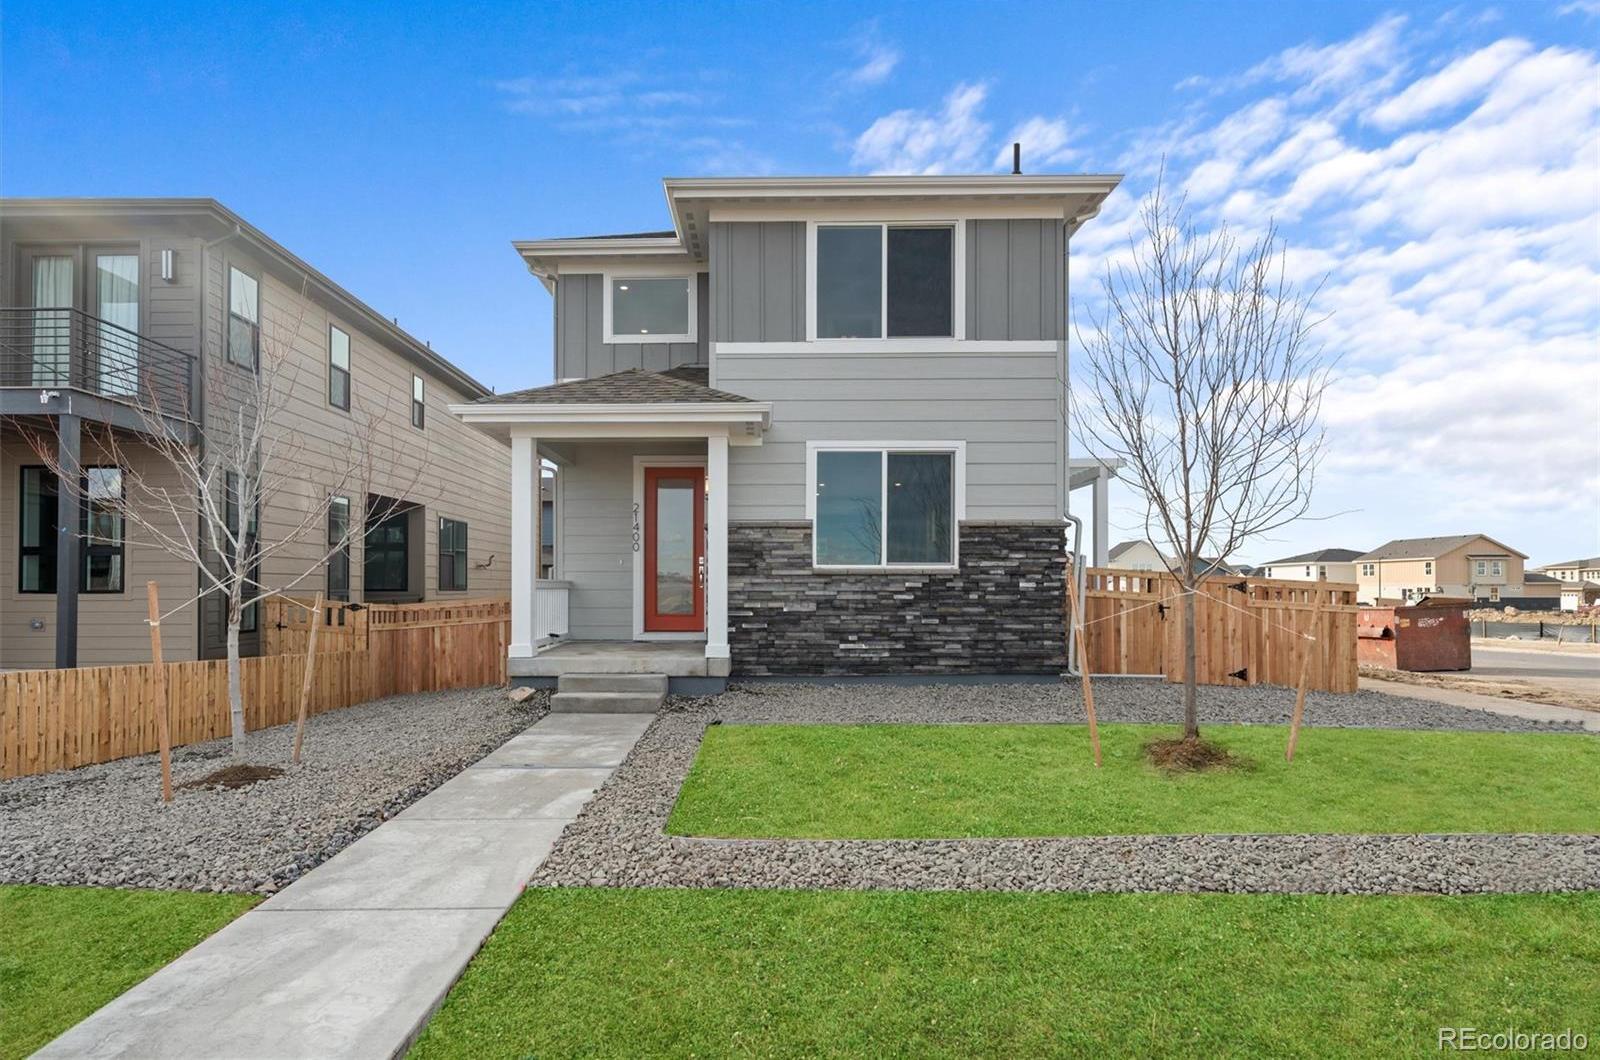 Photo one of 21025 E 62Nd Ave Aurora CO 80019 | MLS 6864055